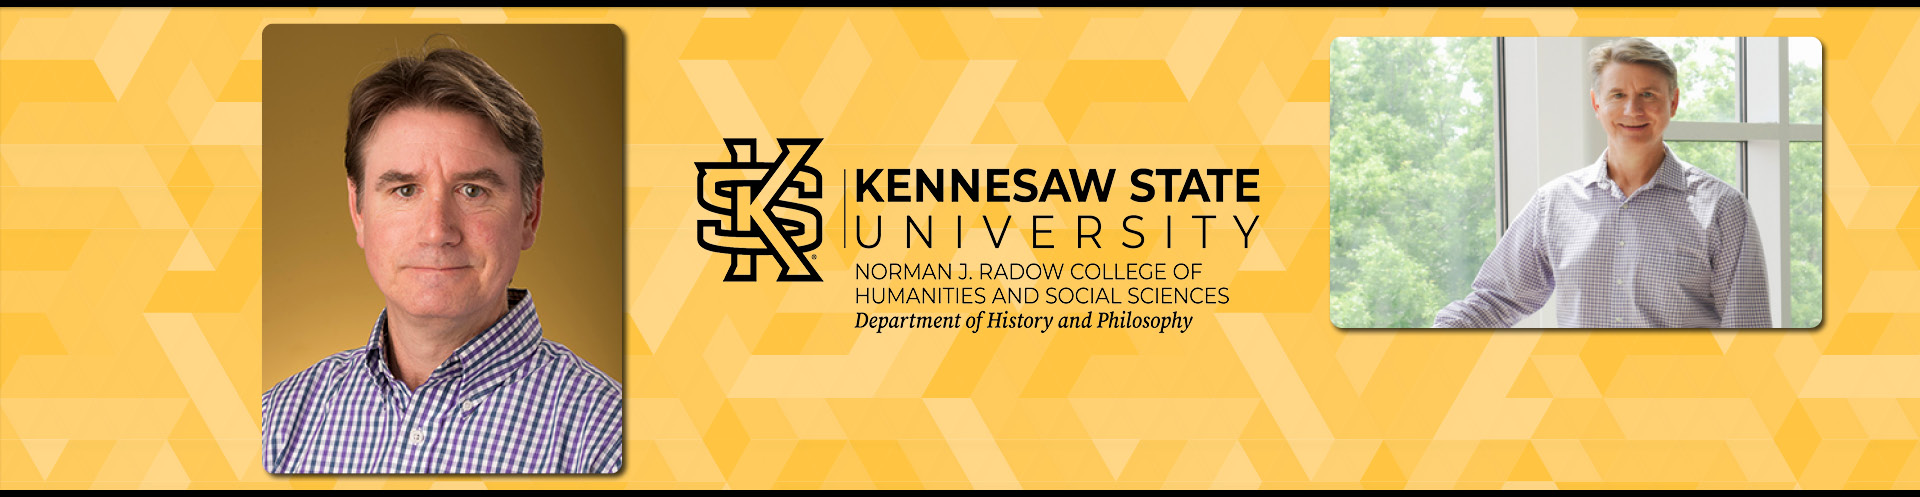 Bryan McGovern Named Department Of History & Philosophy Chair